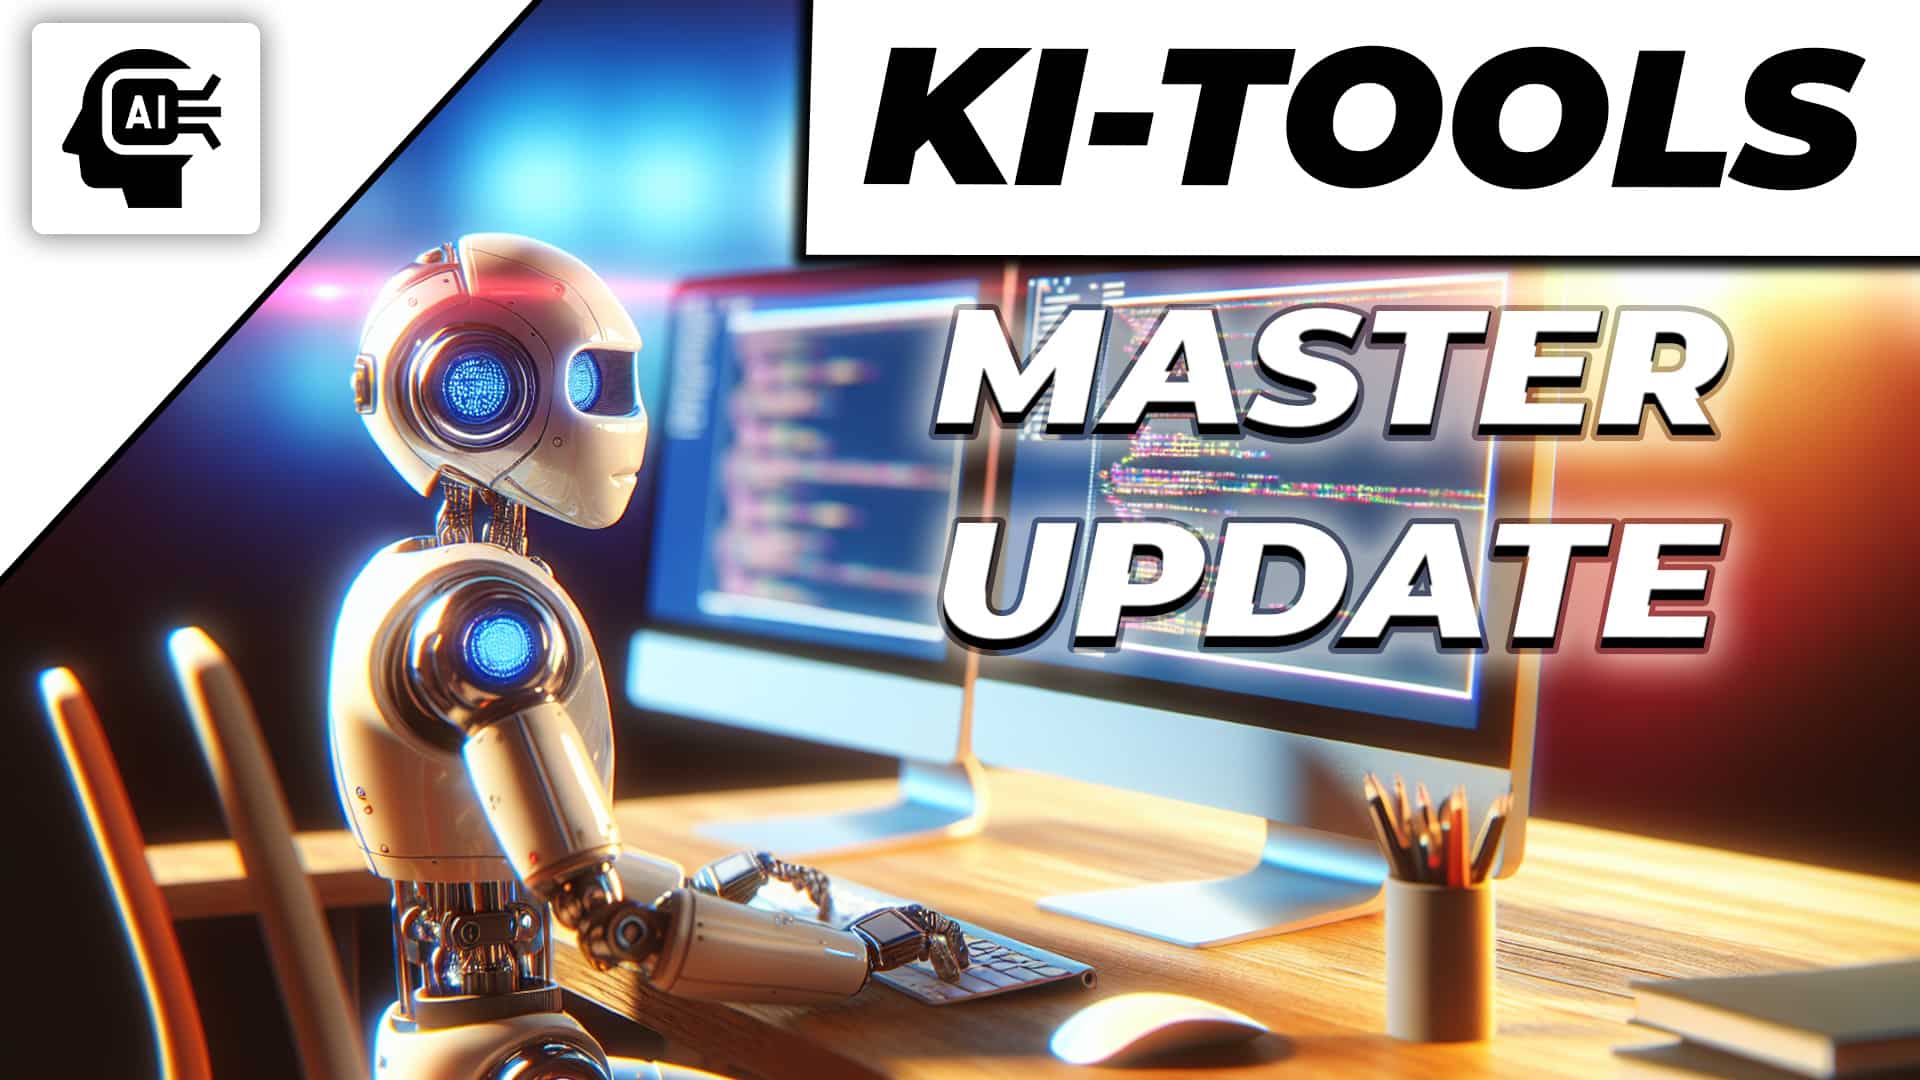 Free AI tools MASTER UPDATE – Now even better performance